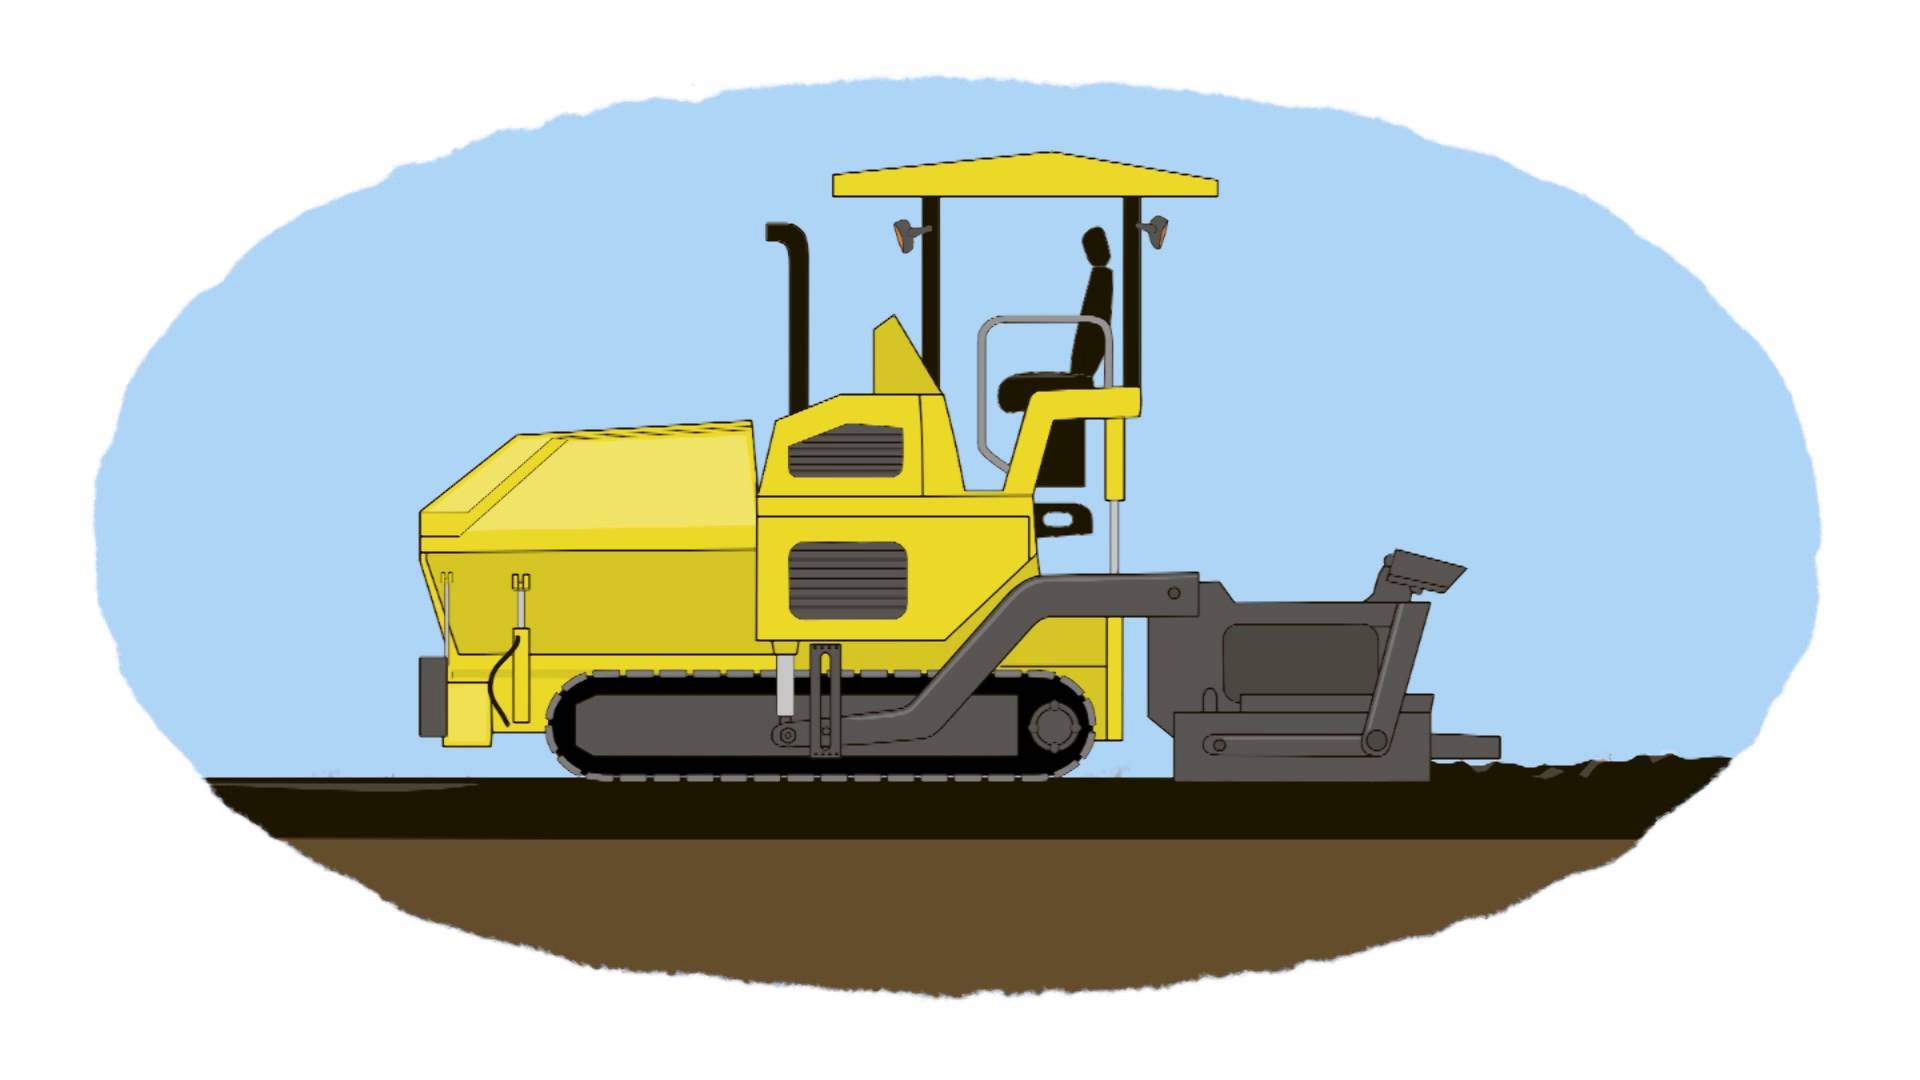 Bulldozer clipart road roller. The colouring book learn